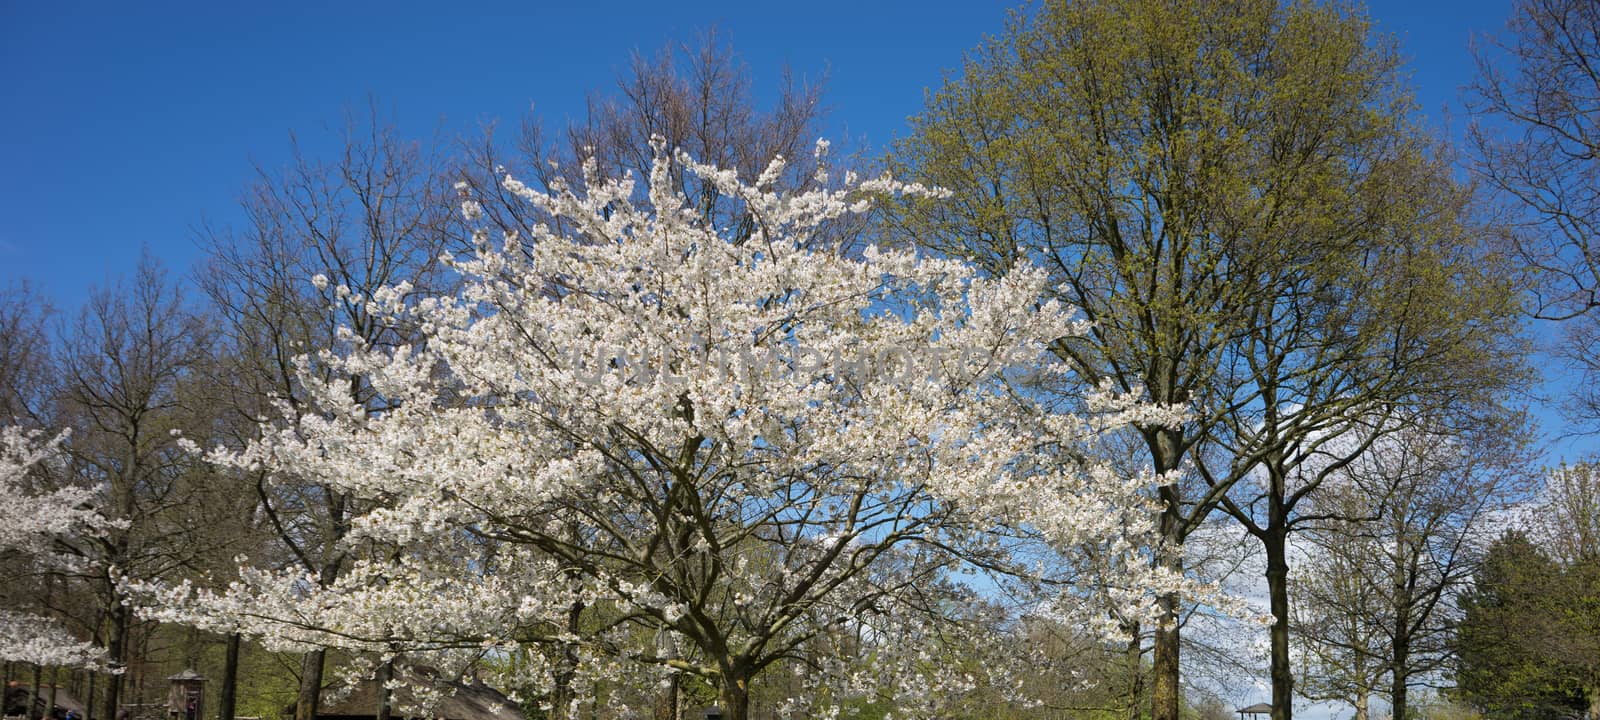 White cherry blossom tree against a blue sky in Lisse, Netherlan by ramana16